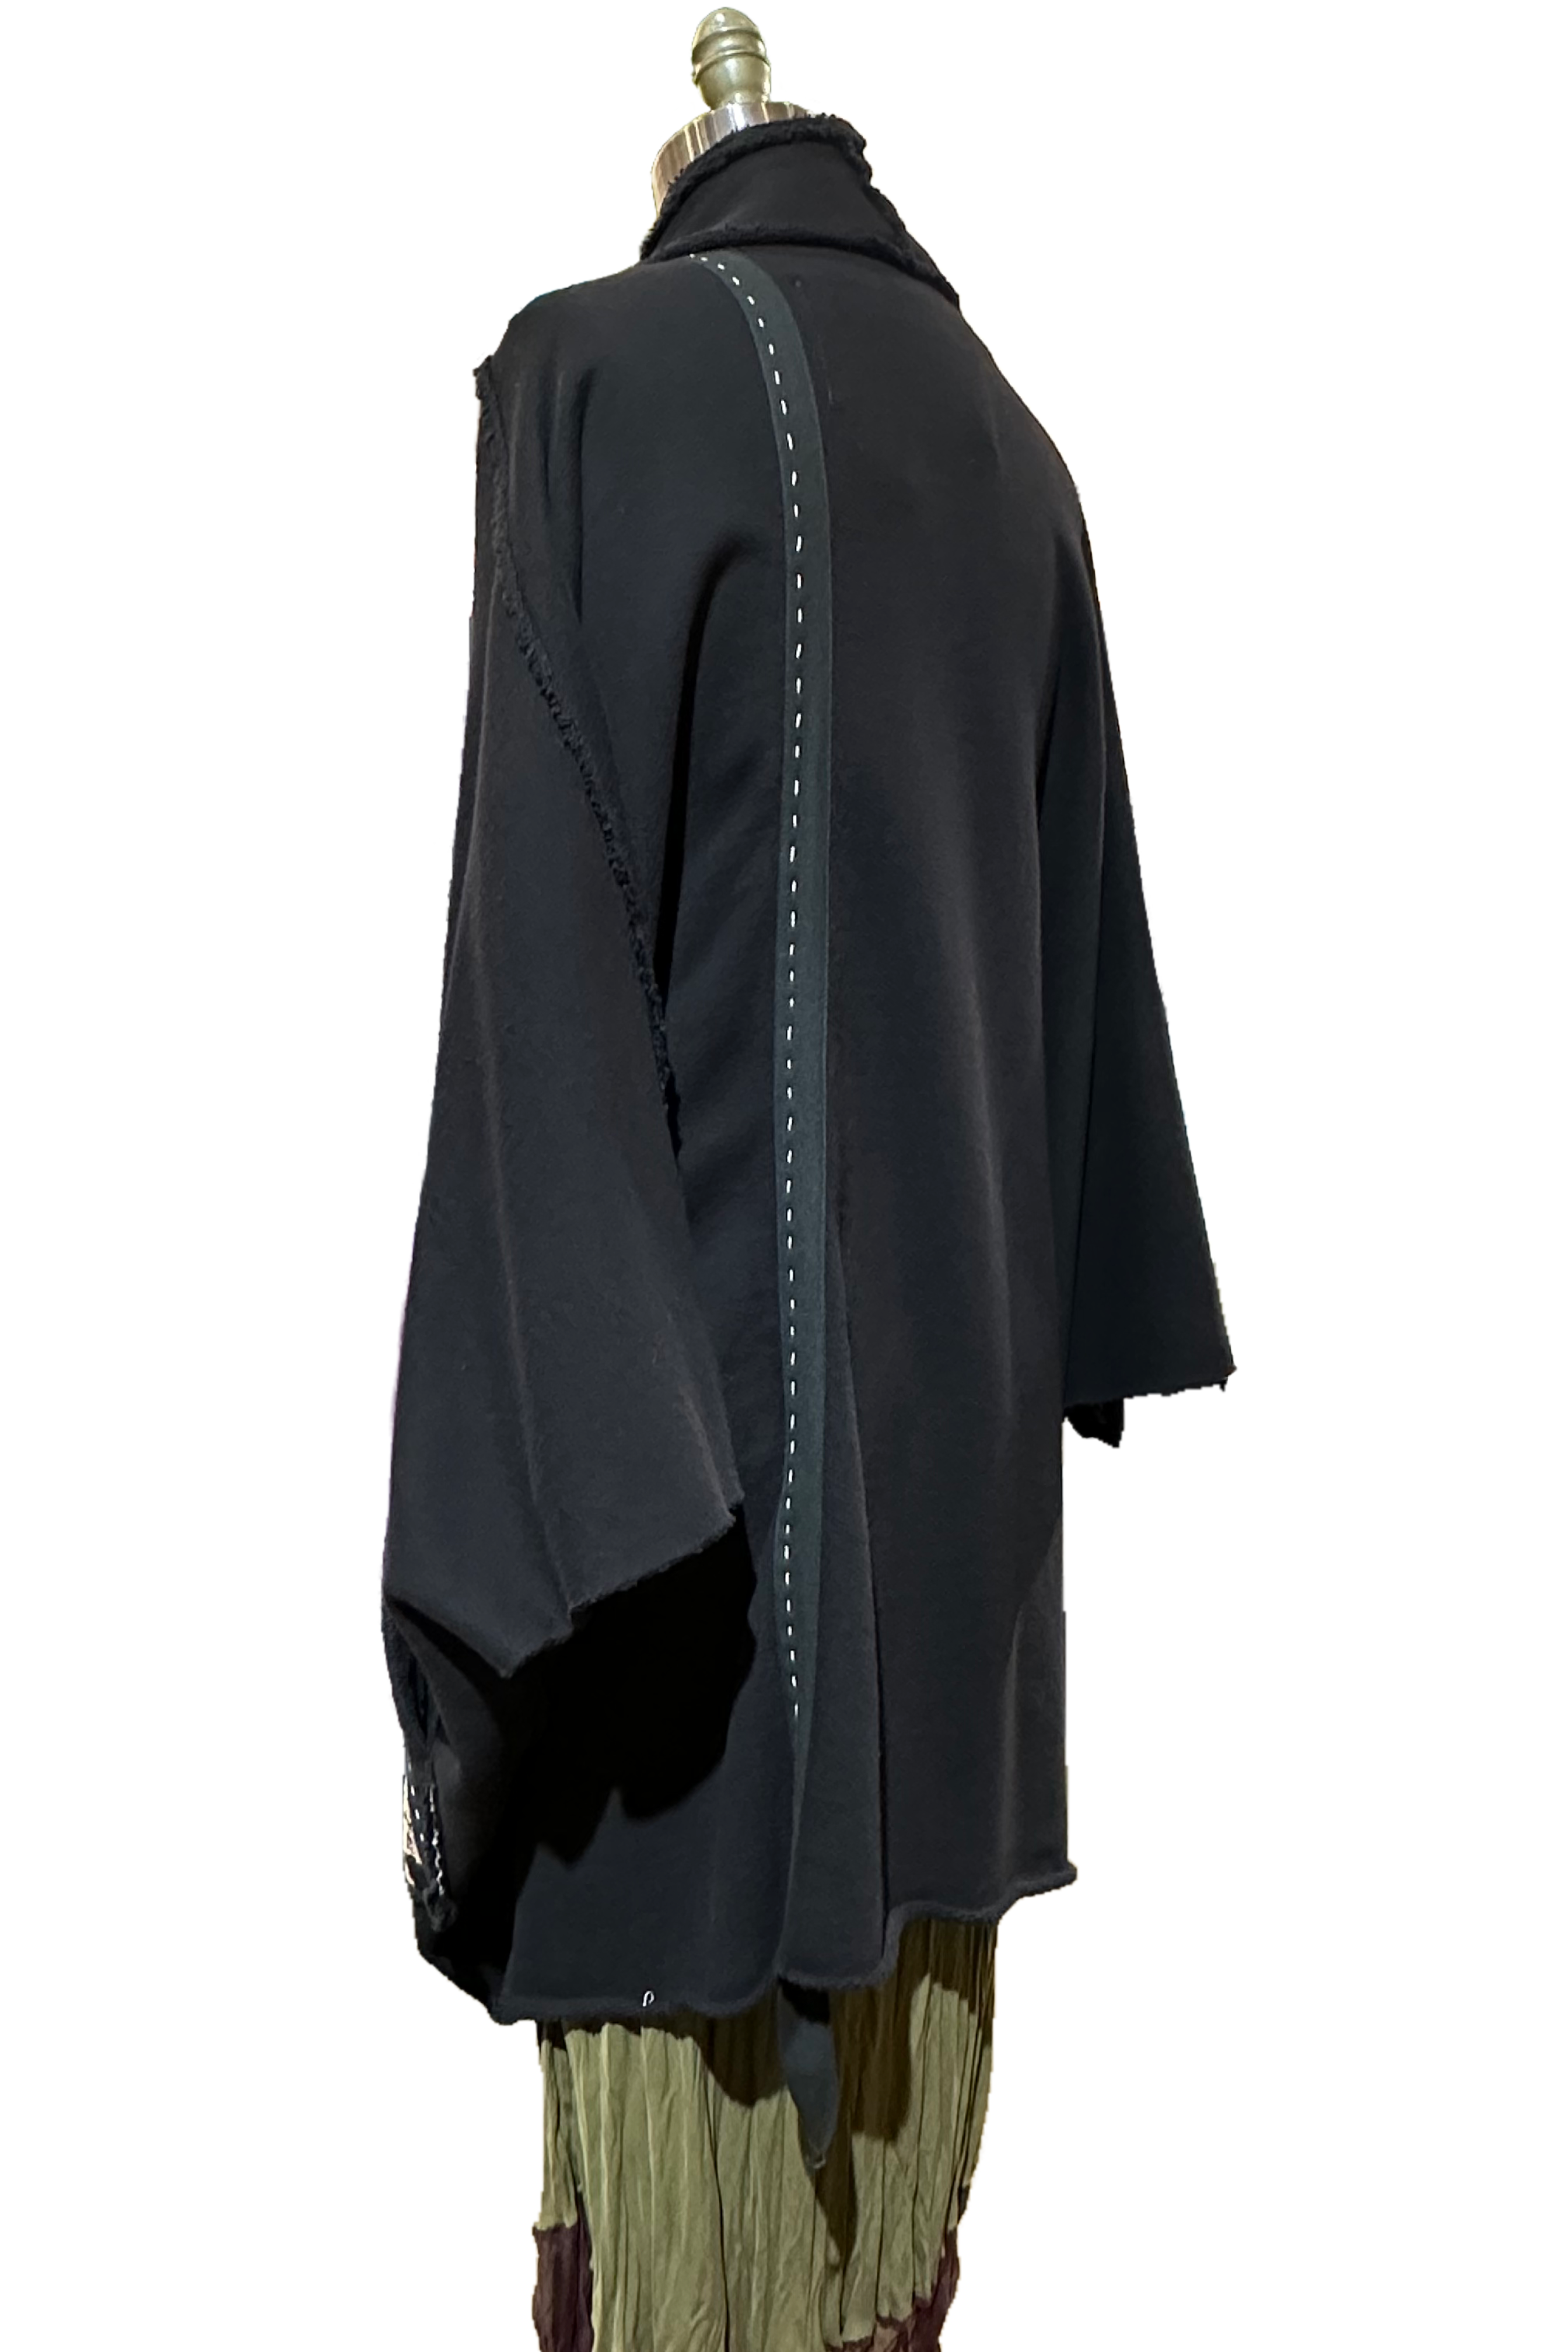 Alquimie Wolf Cape in Black & Natural - Brass Print - L